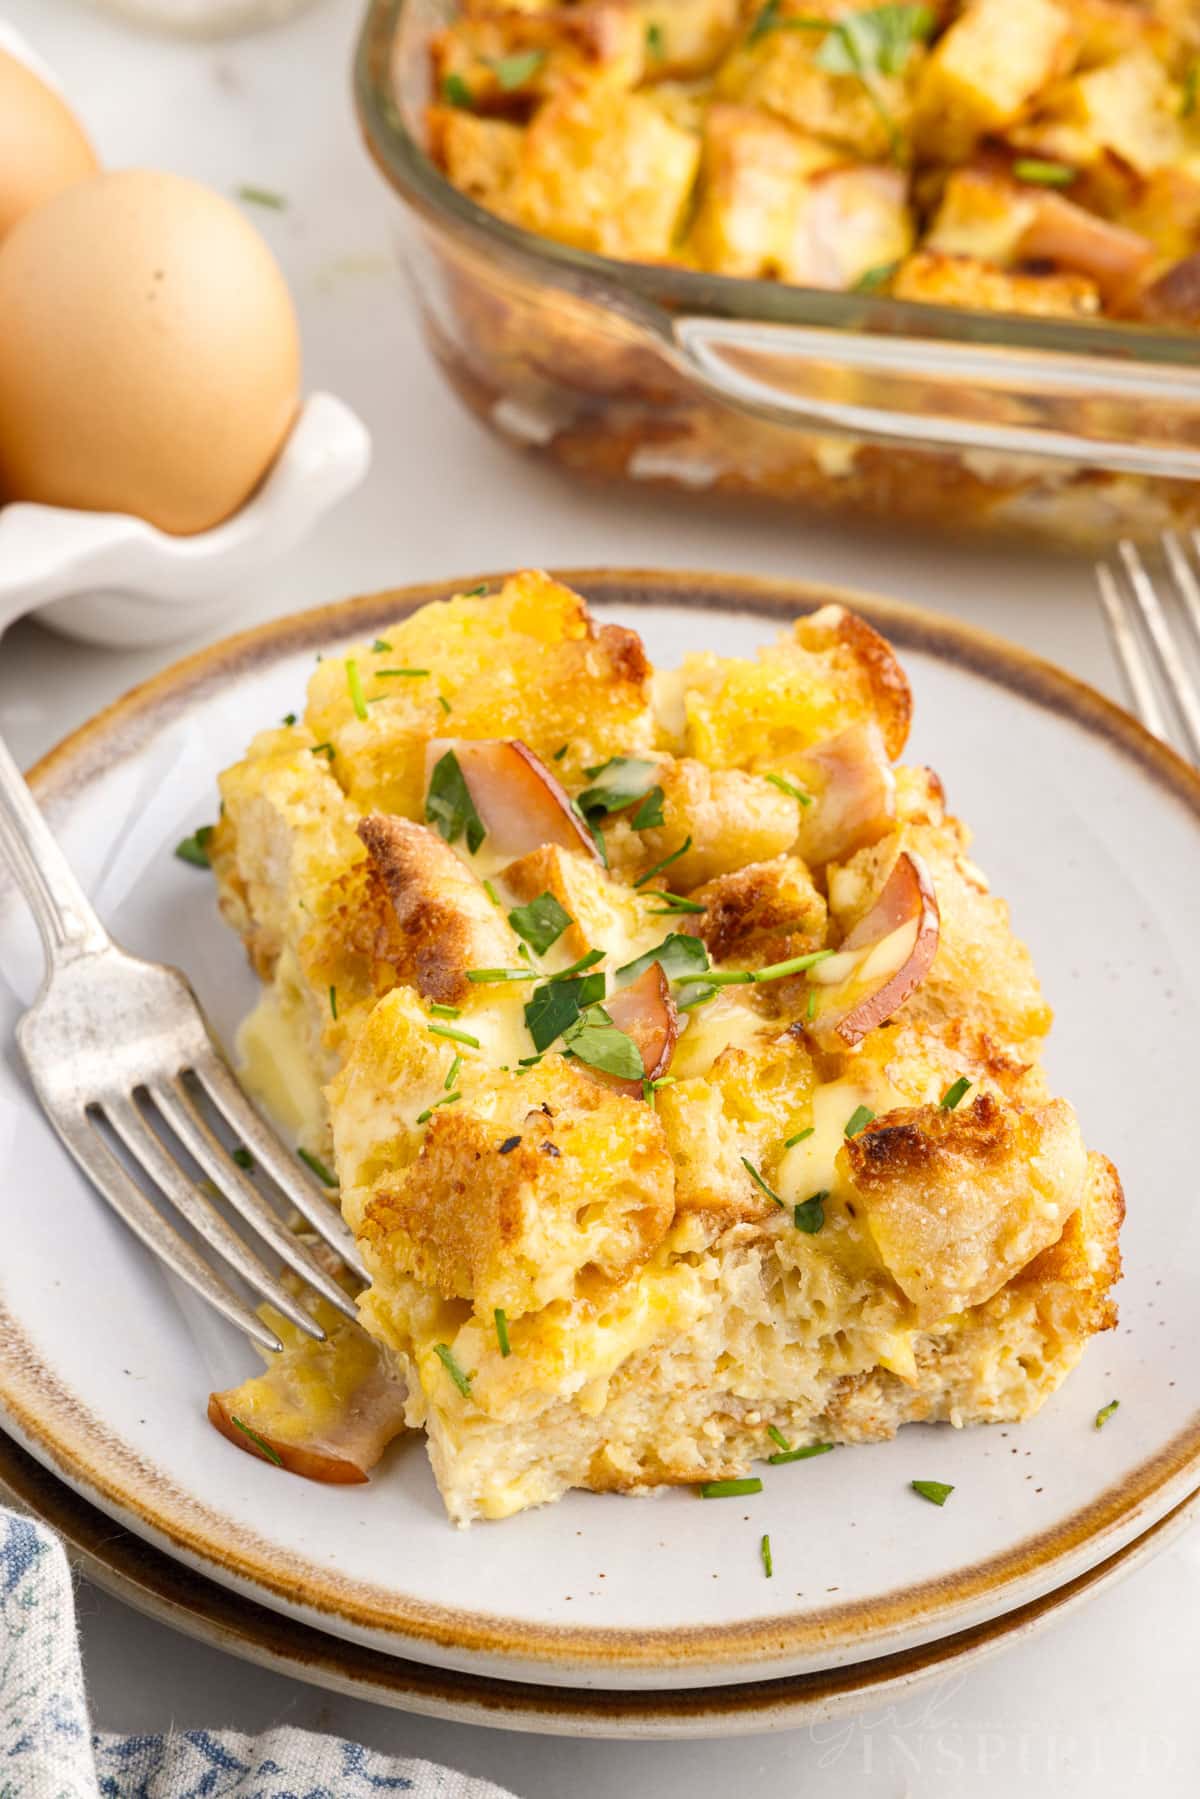 A dish with a slice of Eggs Benedict Casserole on it with a fork, eggs and casserole in the background.